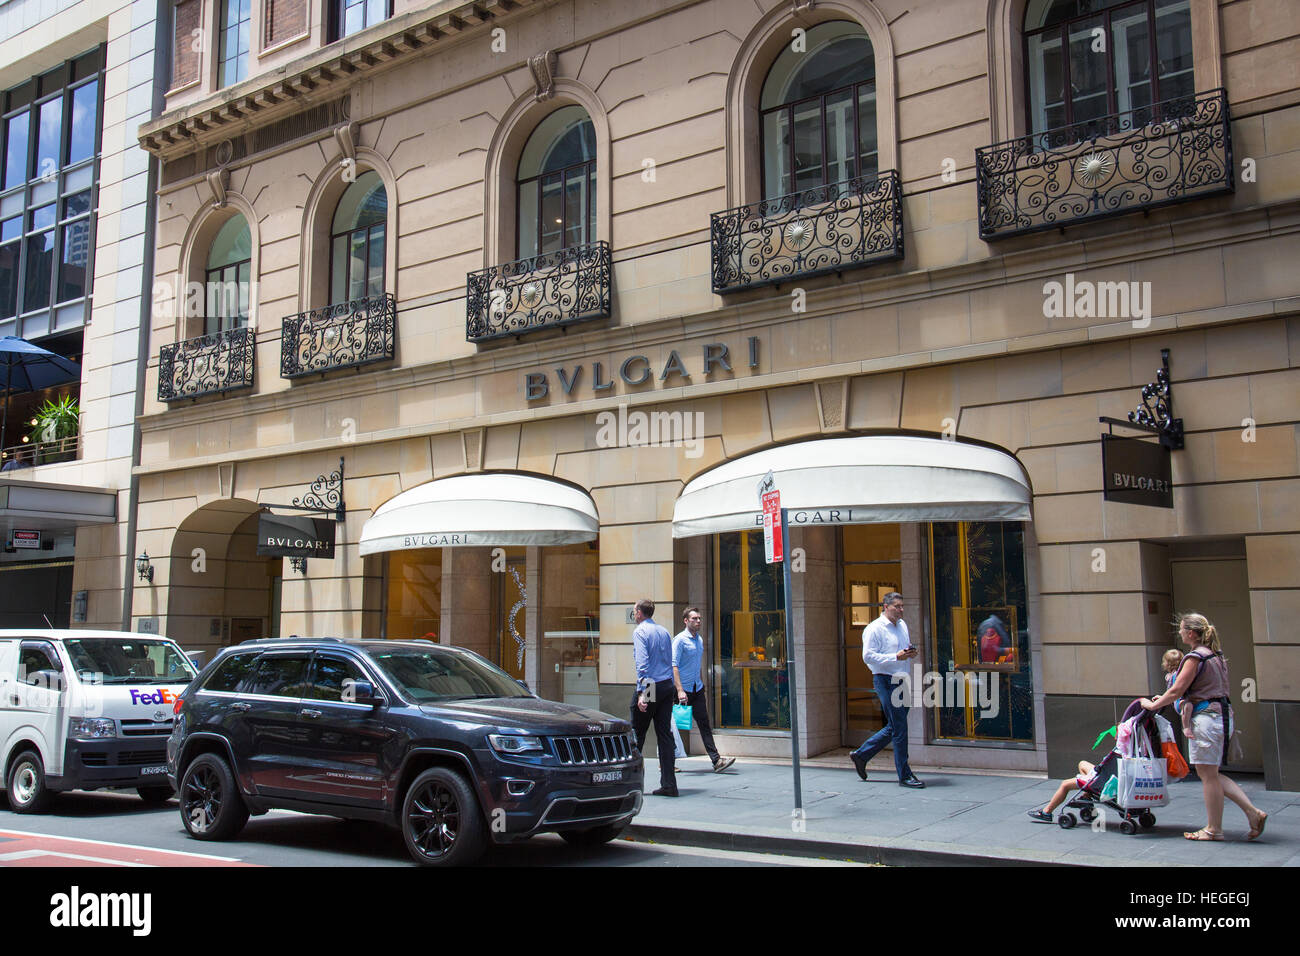 Bvlgari store entrance frontage in 